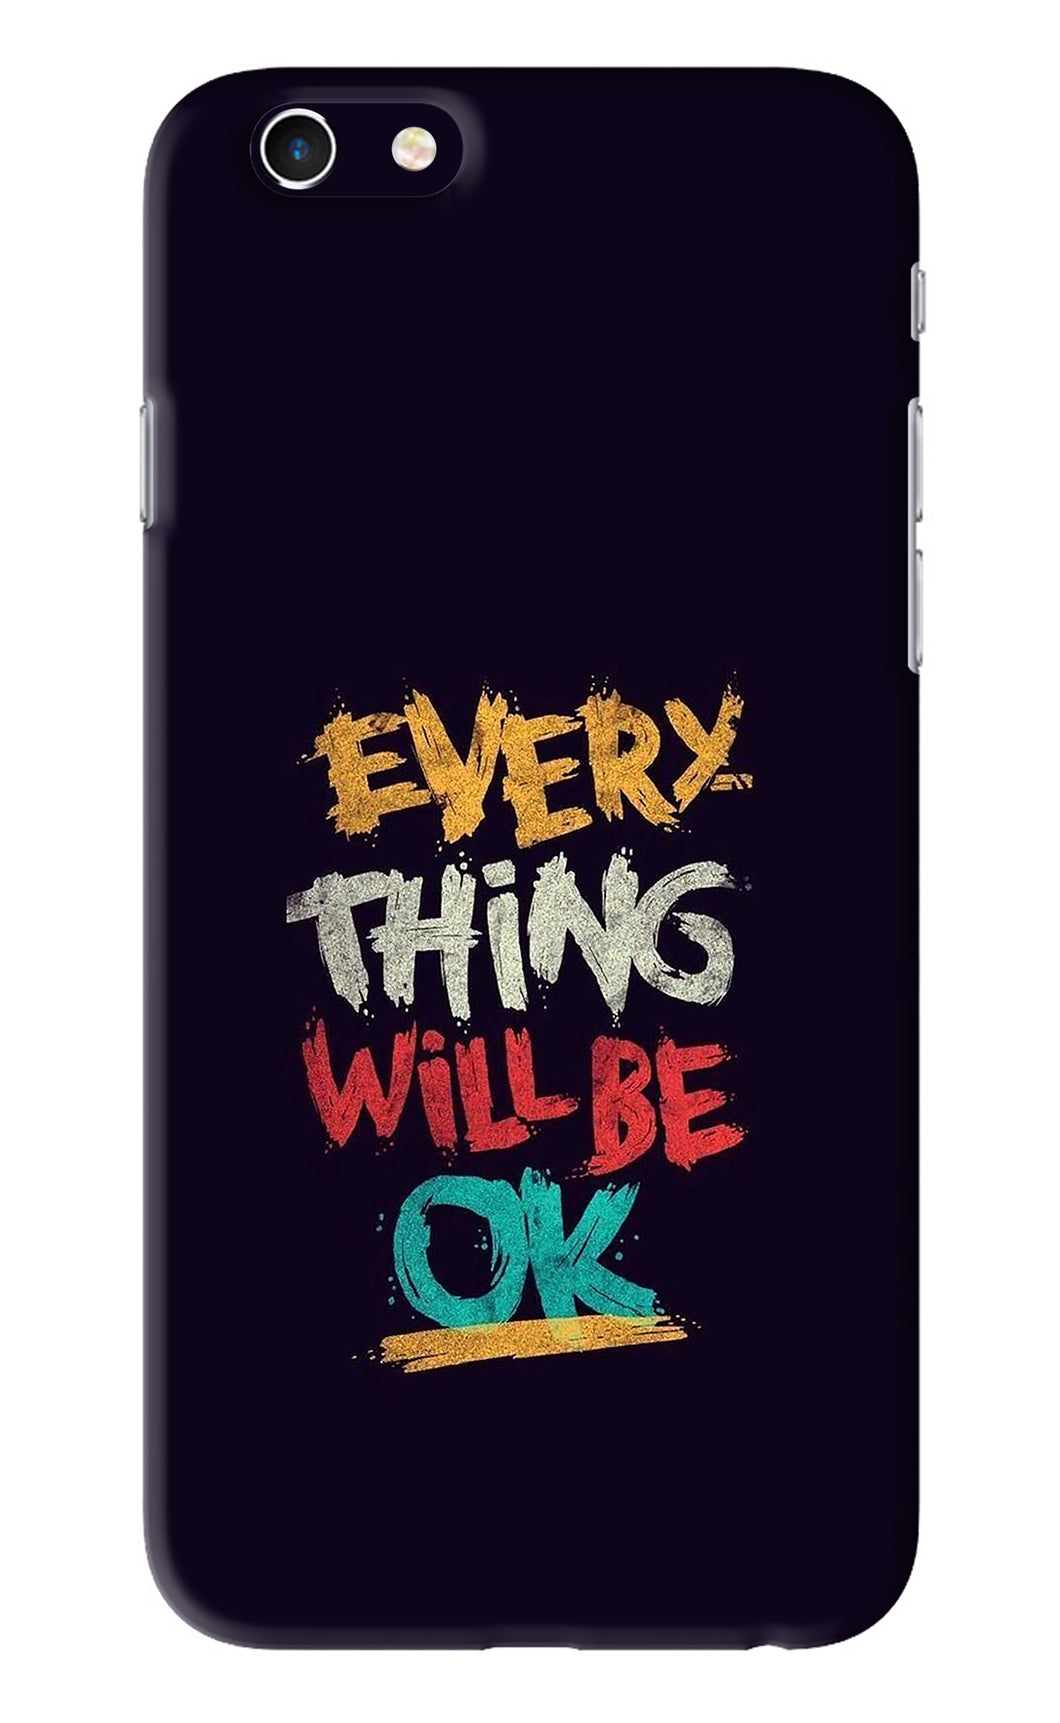 Everything Will Be Ok iPhone 6 Back Skin Wrap